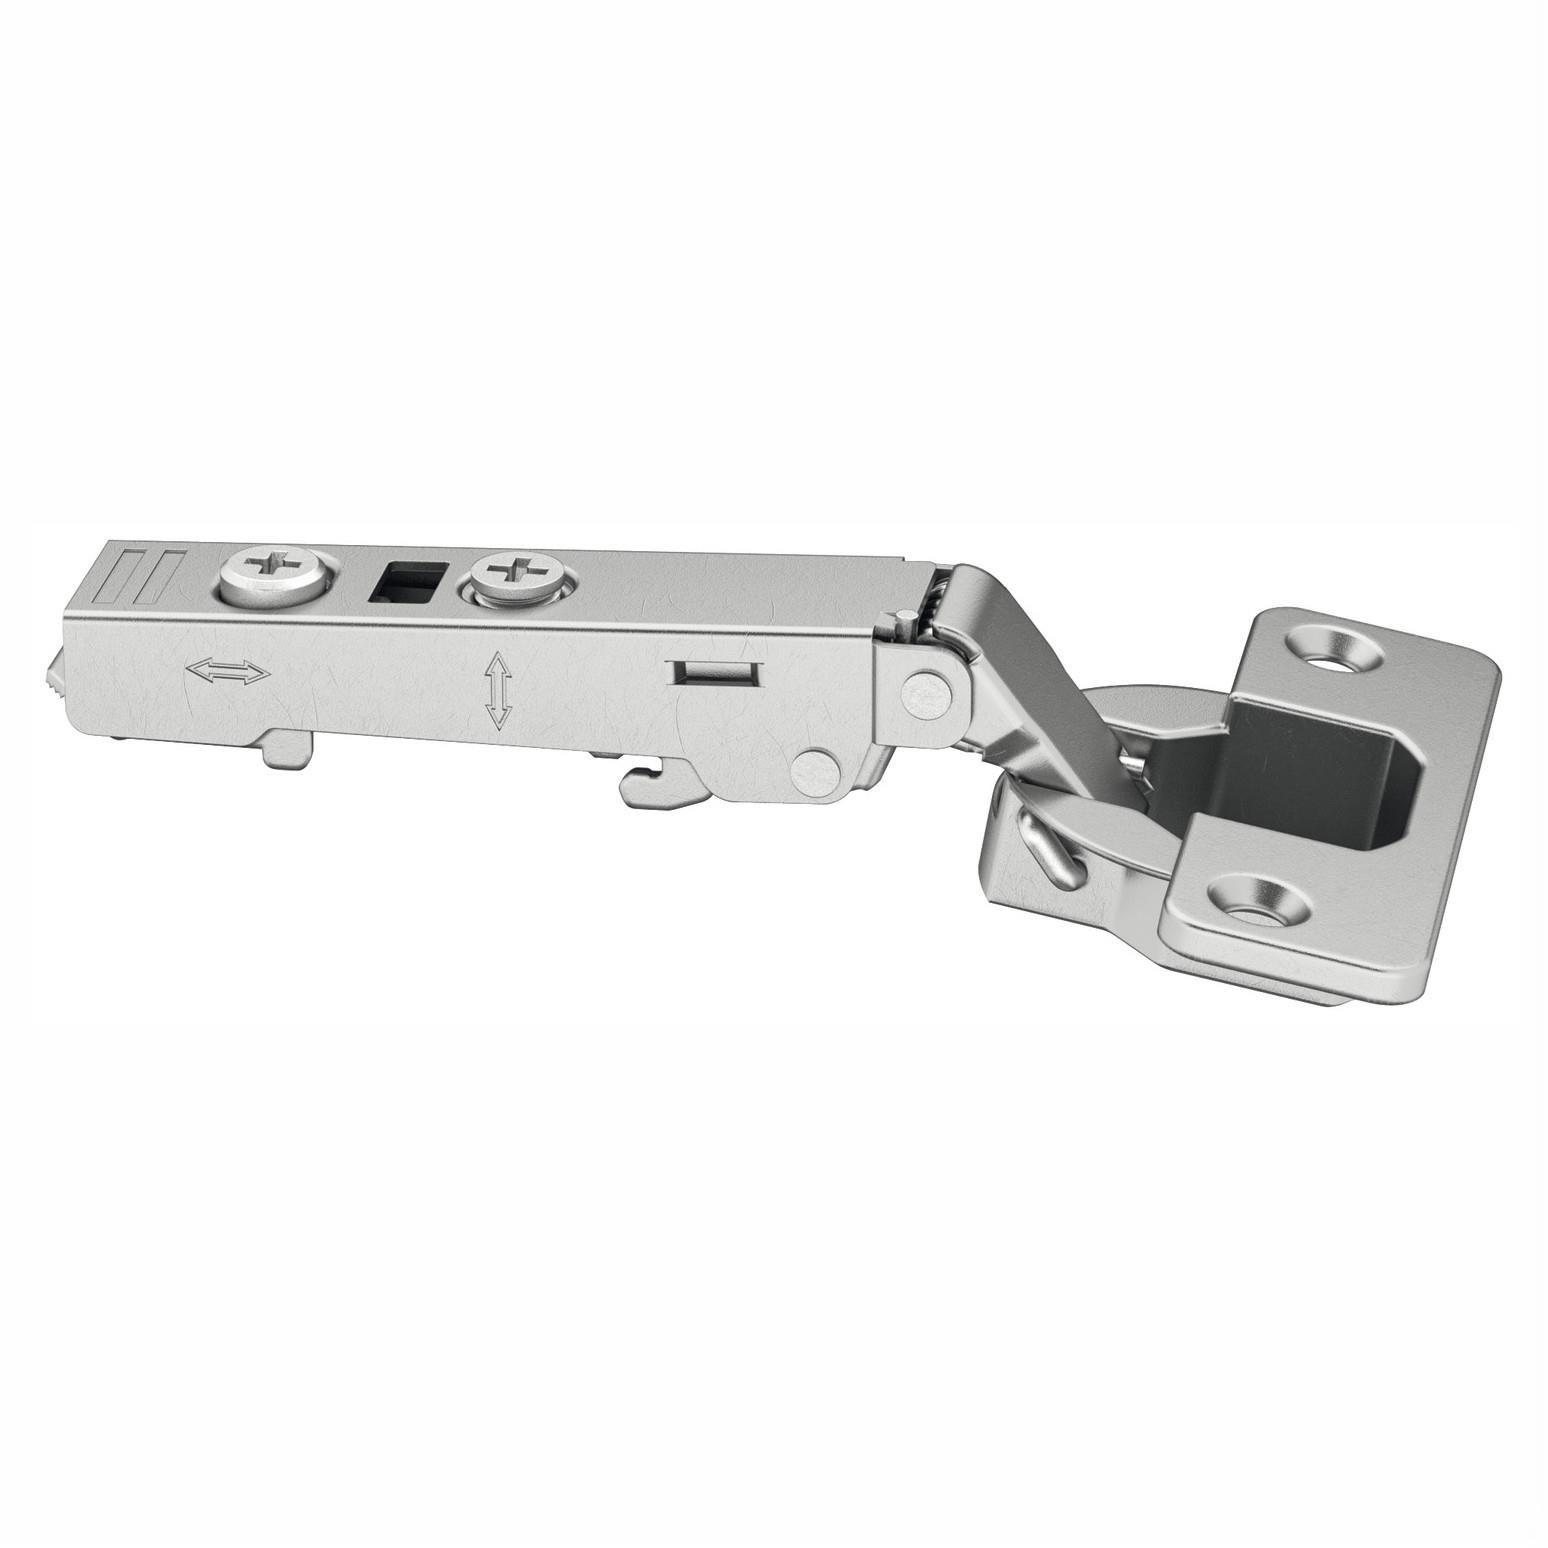 Hafele 311.04.248 35mm Concealed Metalla Hinge; 110' Opening; Integrated Soft Close Full Overlay Mounting; Clip On Plate: Nickel Plated (NP) (HAF-311.70.610/612)